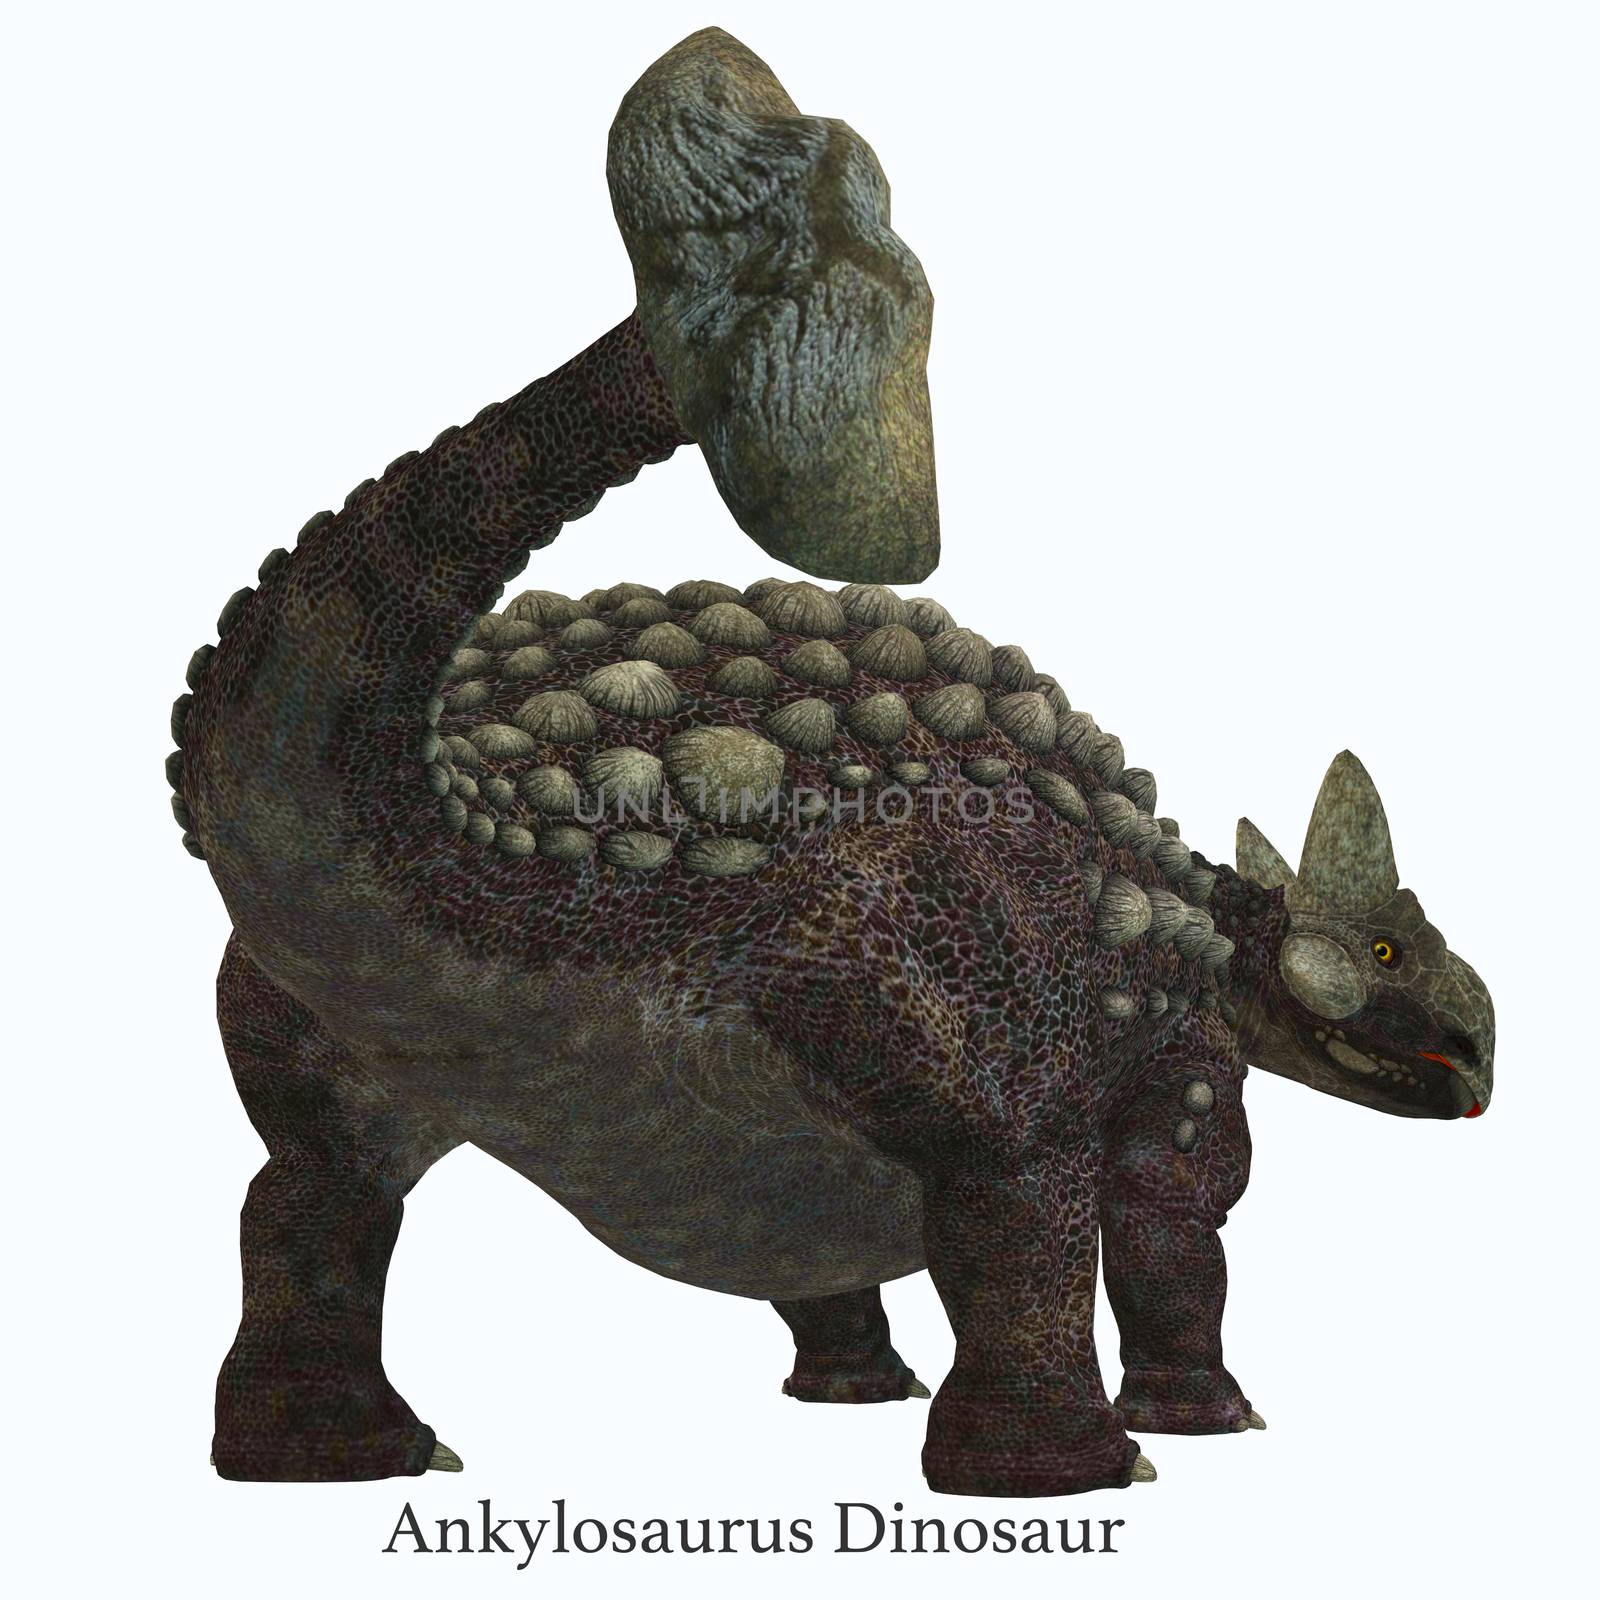 Ankylosaurus was a herbivorous armored dinosaur that lived in North America in the Cretaceous Period.